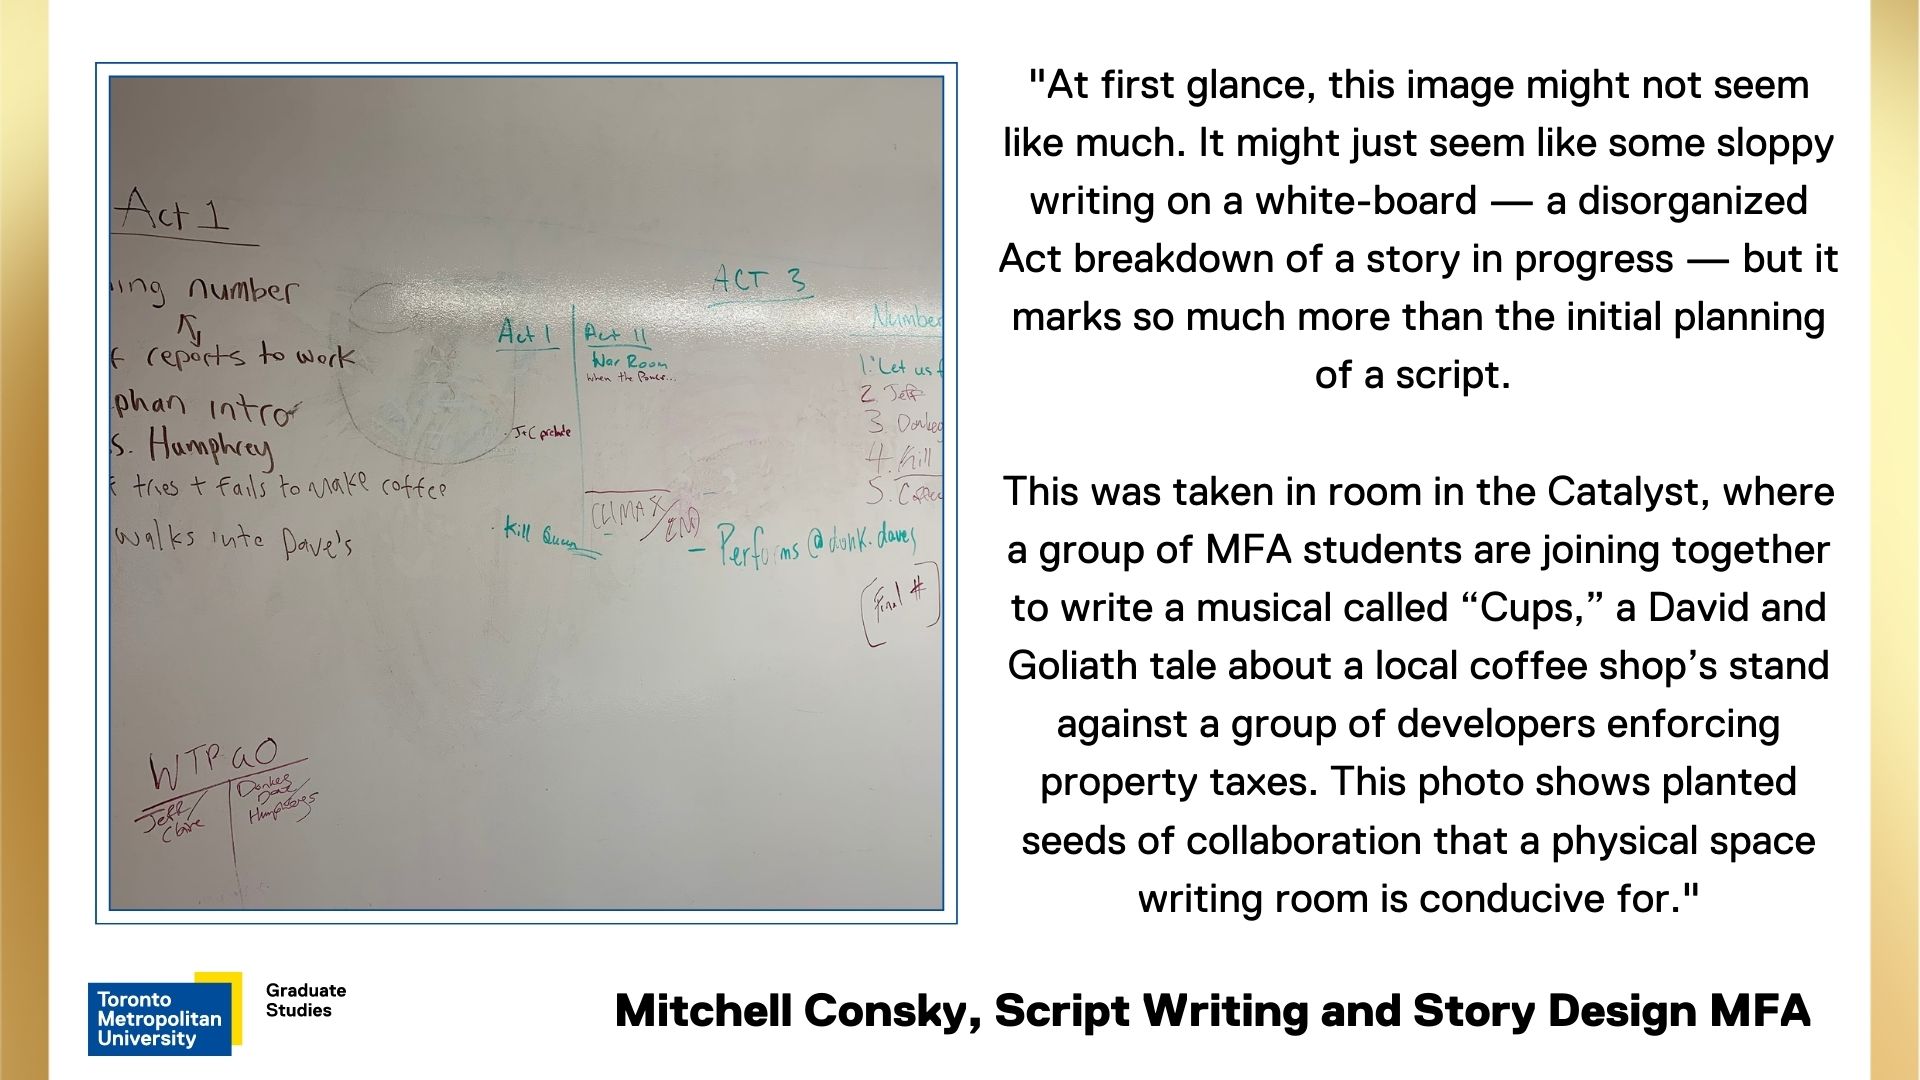 Mitchell-Consky. Writing on whiteboard.